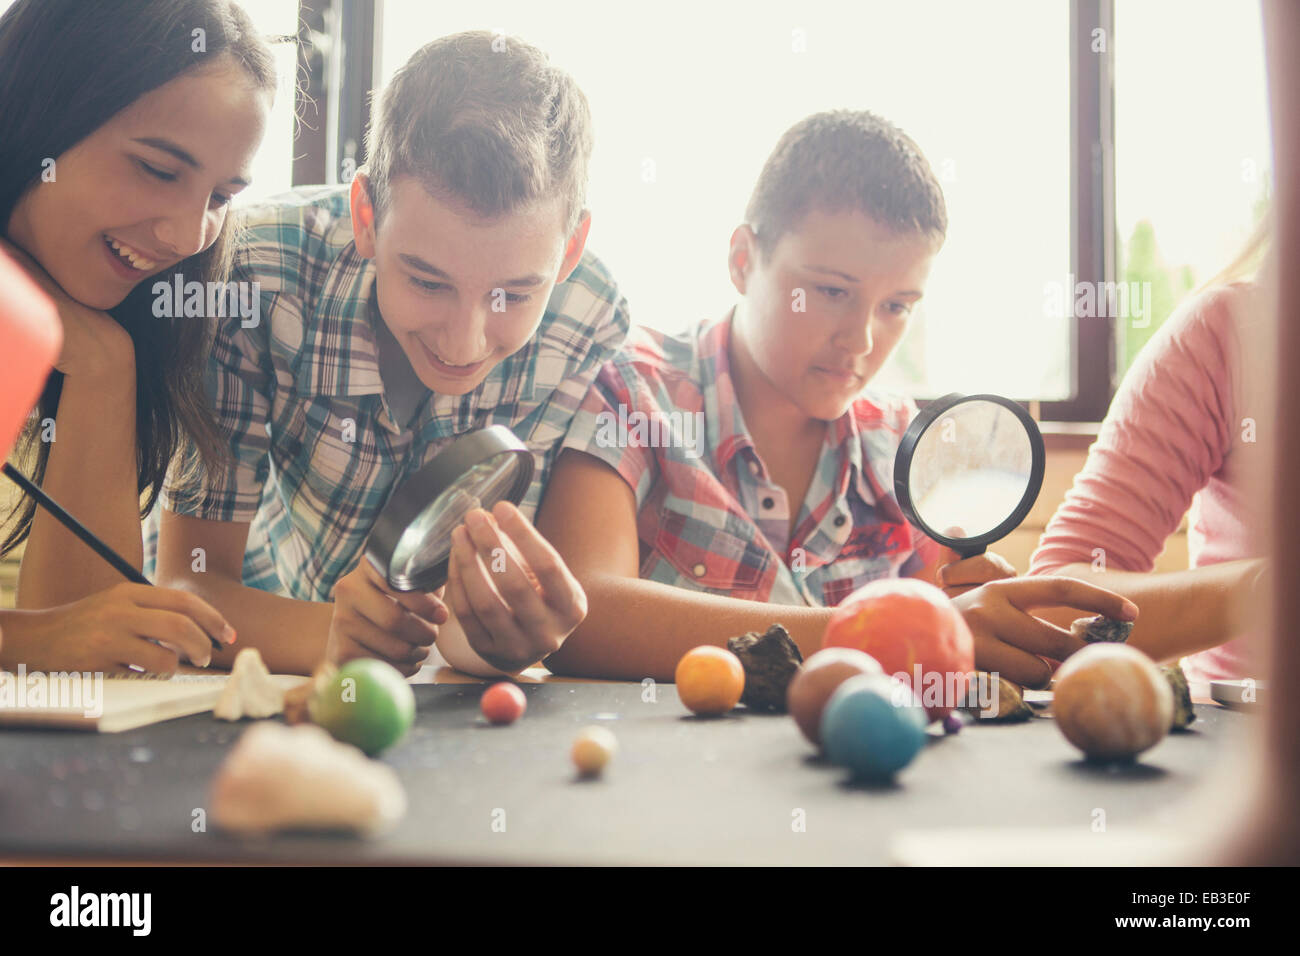 Students examining models of planets in classroom Stock Photo